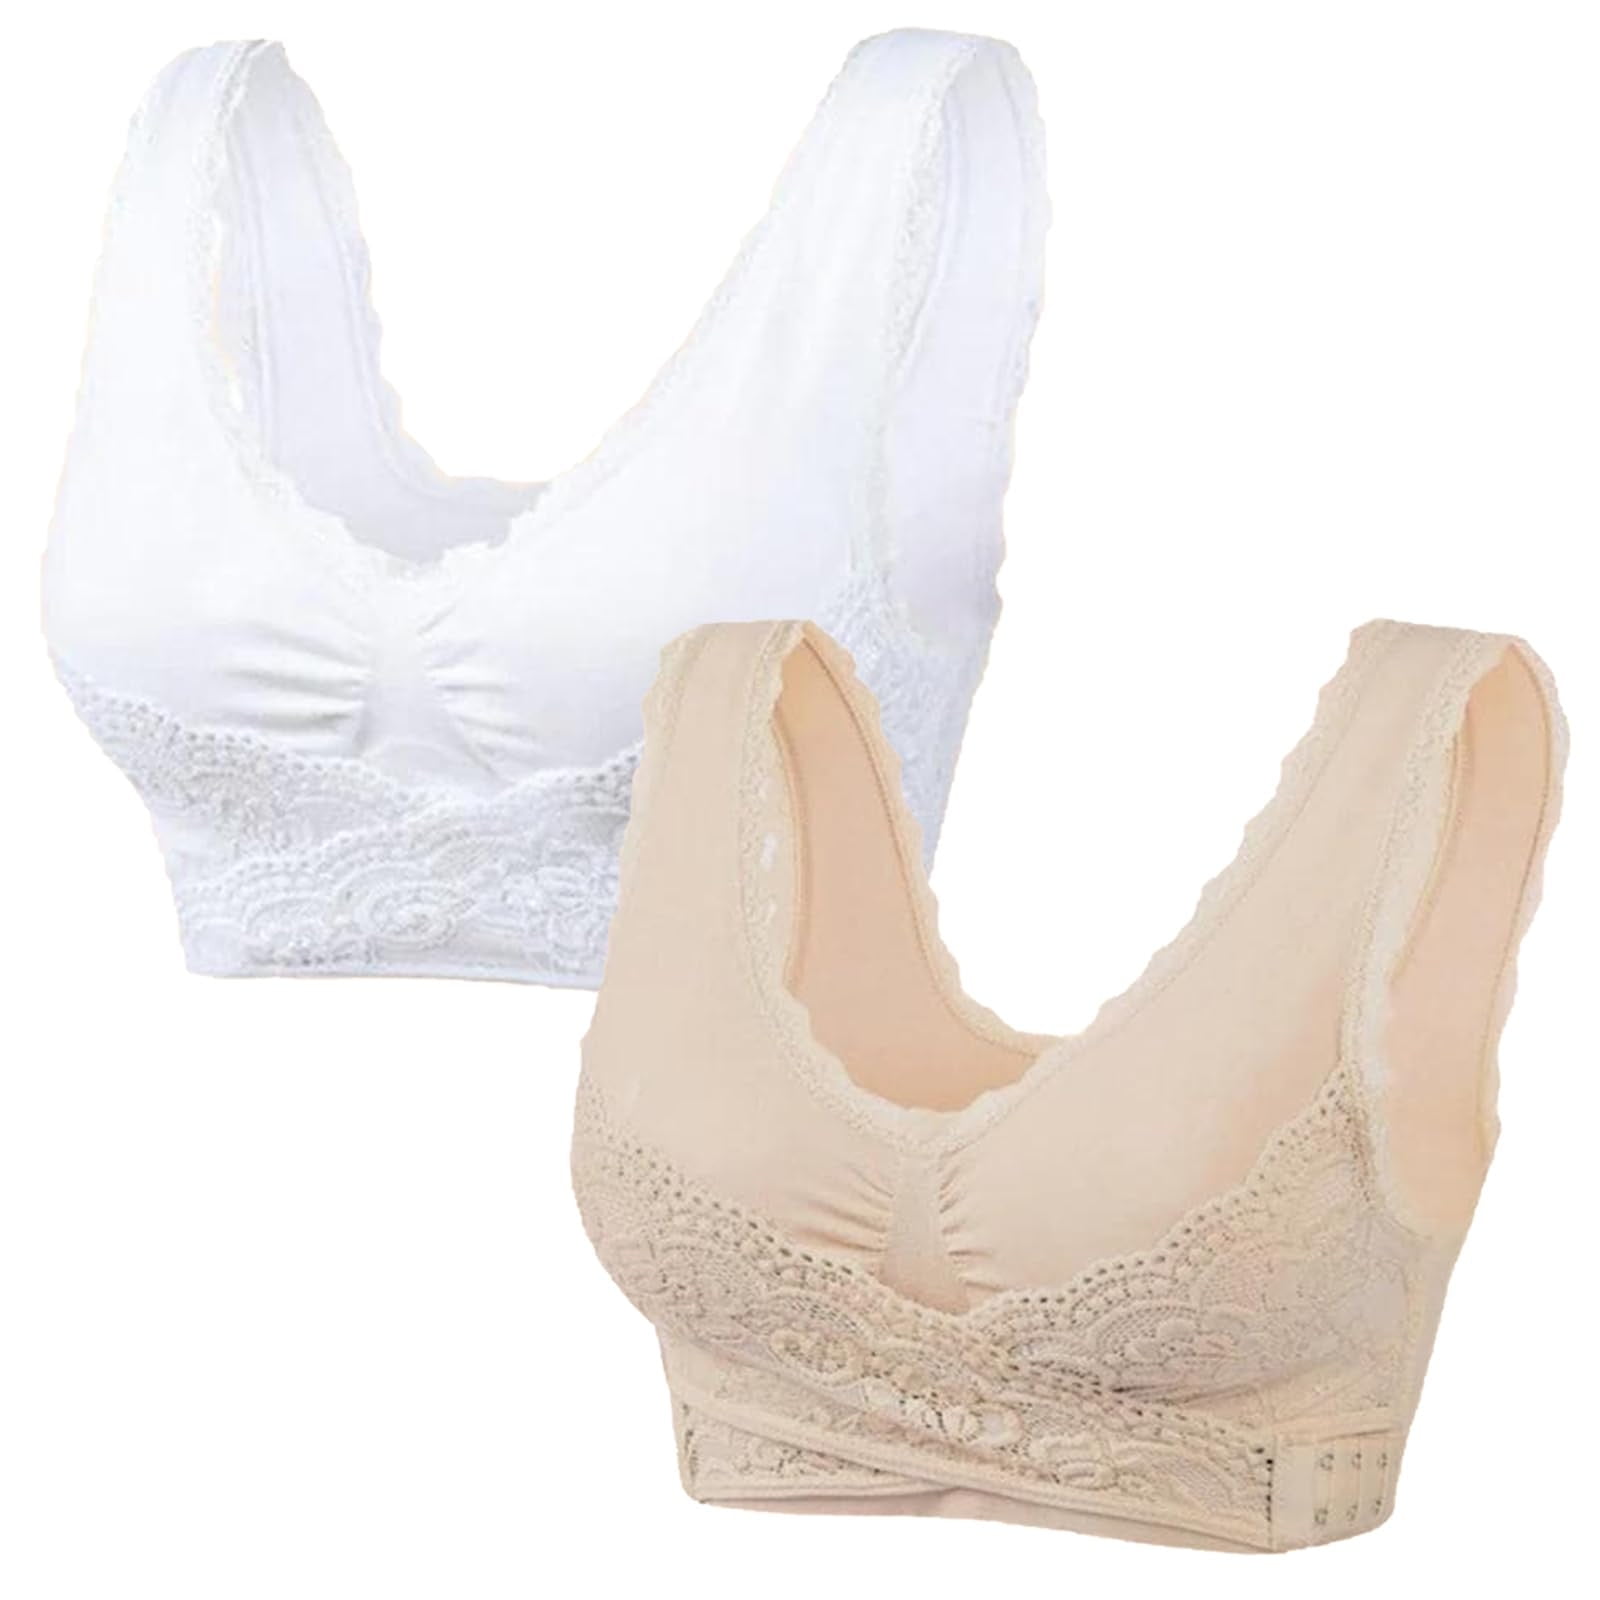 Juicy Couture, Intimates & Sleepwear, Nwtjuicy Couture Blackpink Wide  Strap Sports Bras 2pk Set